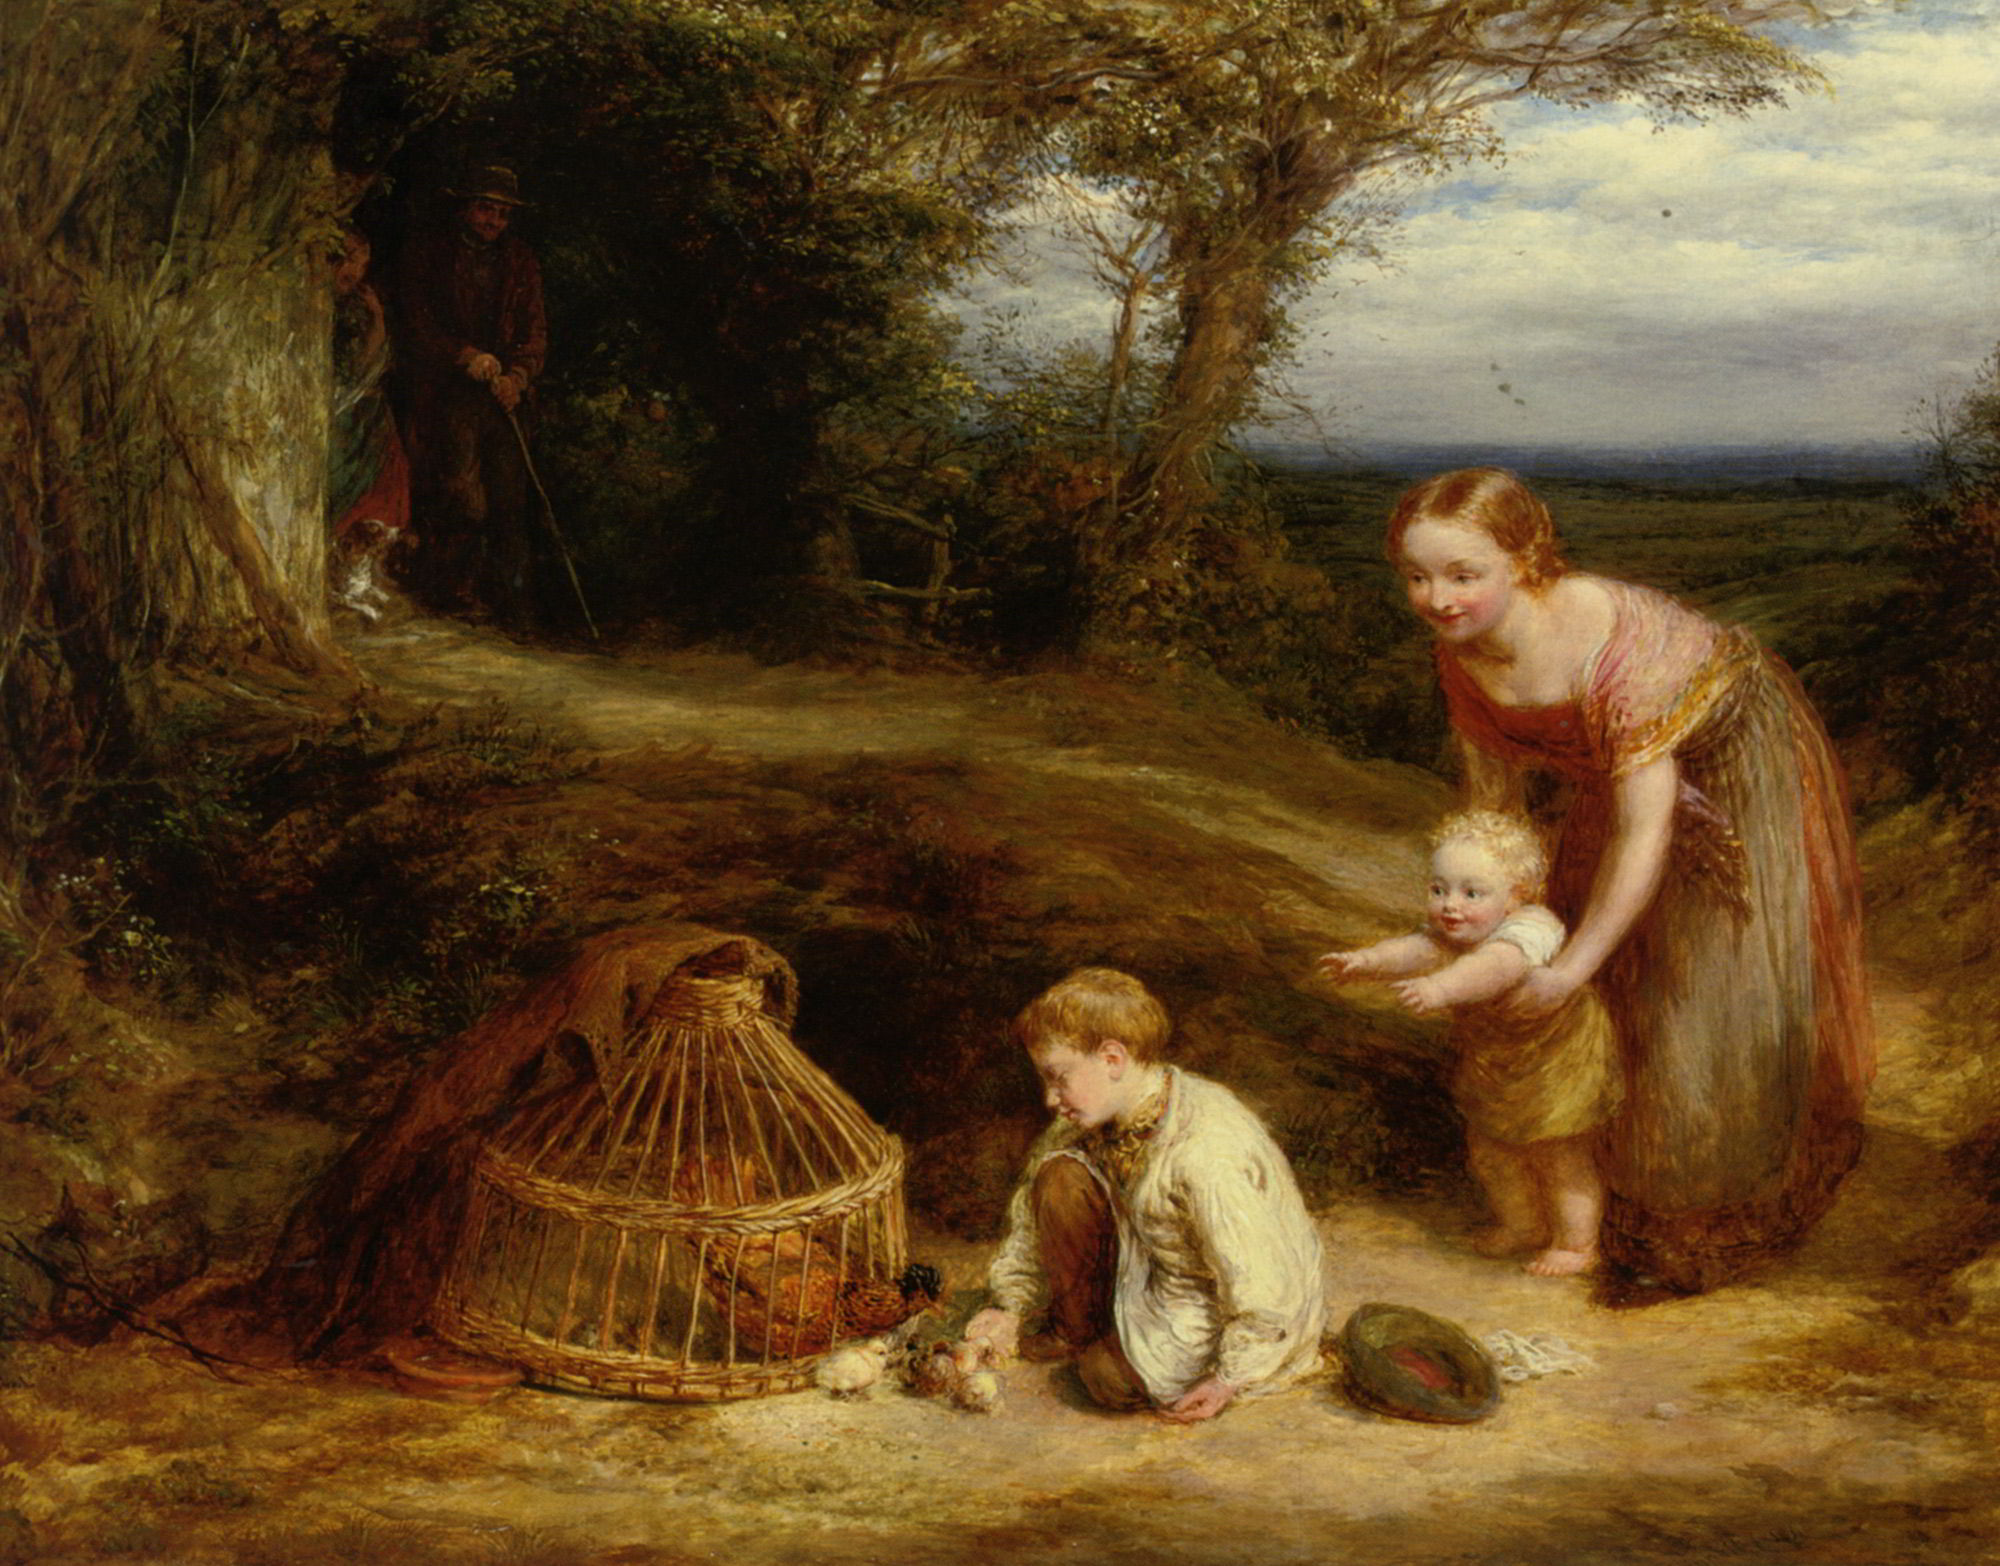 The Young Brood by John Linnell